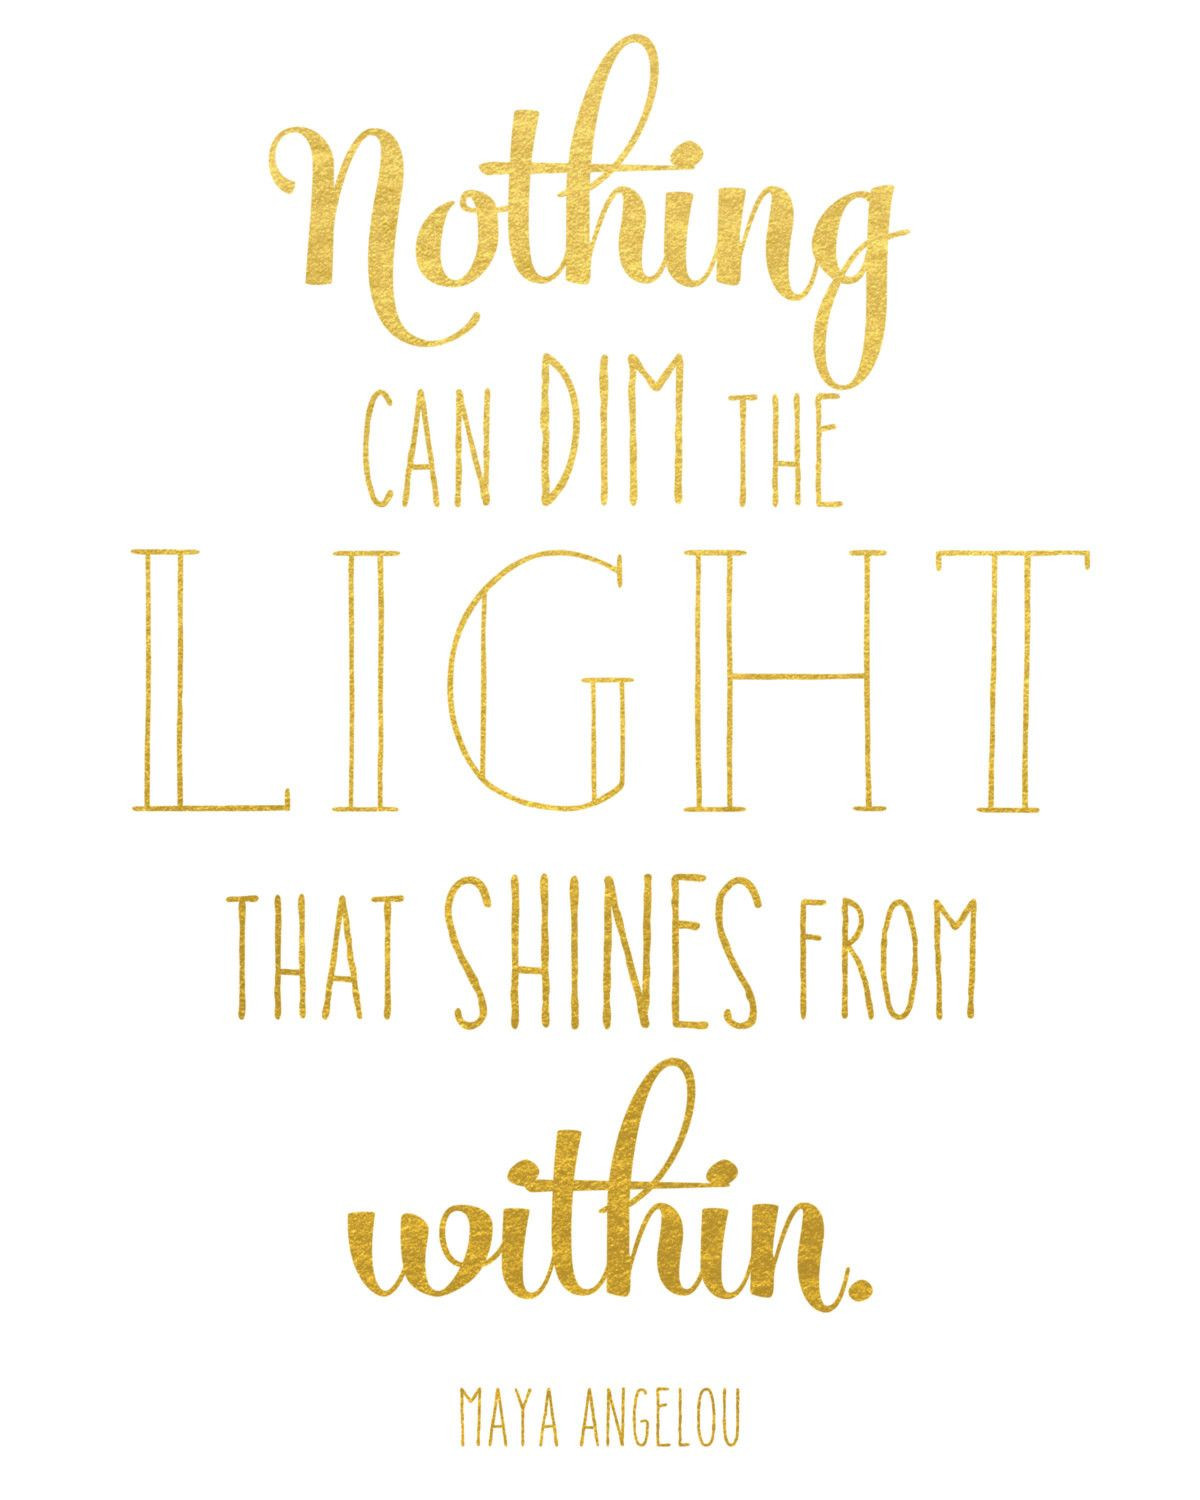 Maya Angelou Graduation Quotes
 Nothing Can Dim the Light Print Products